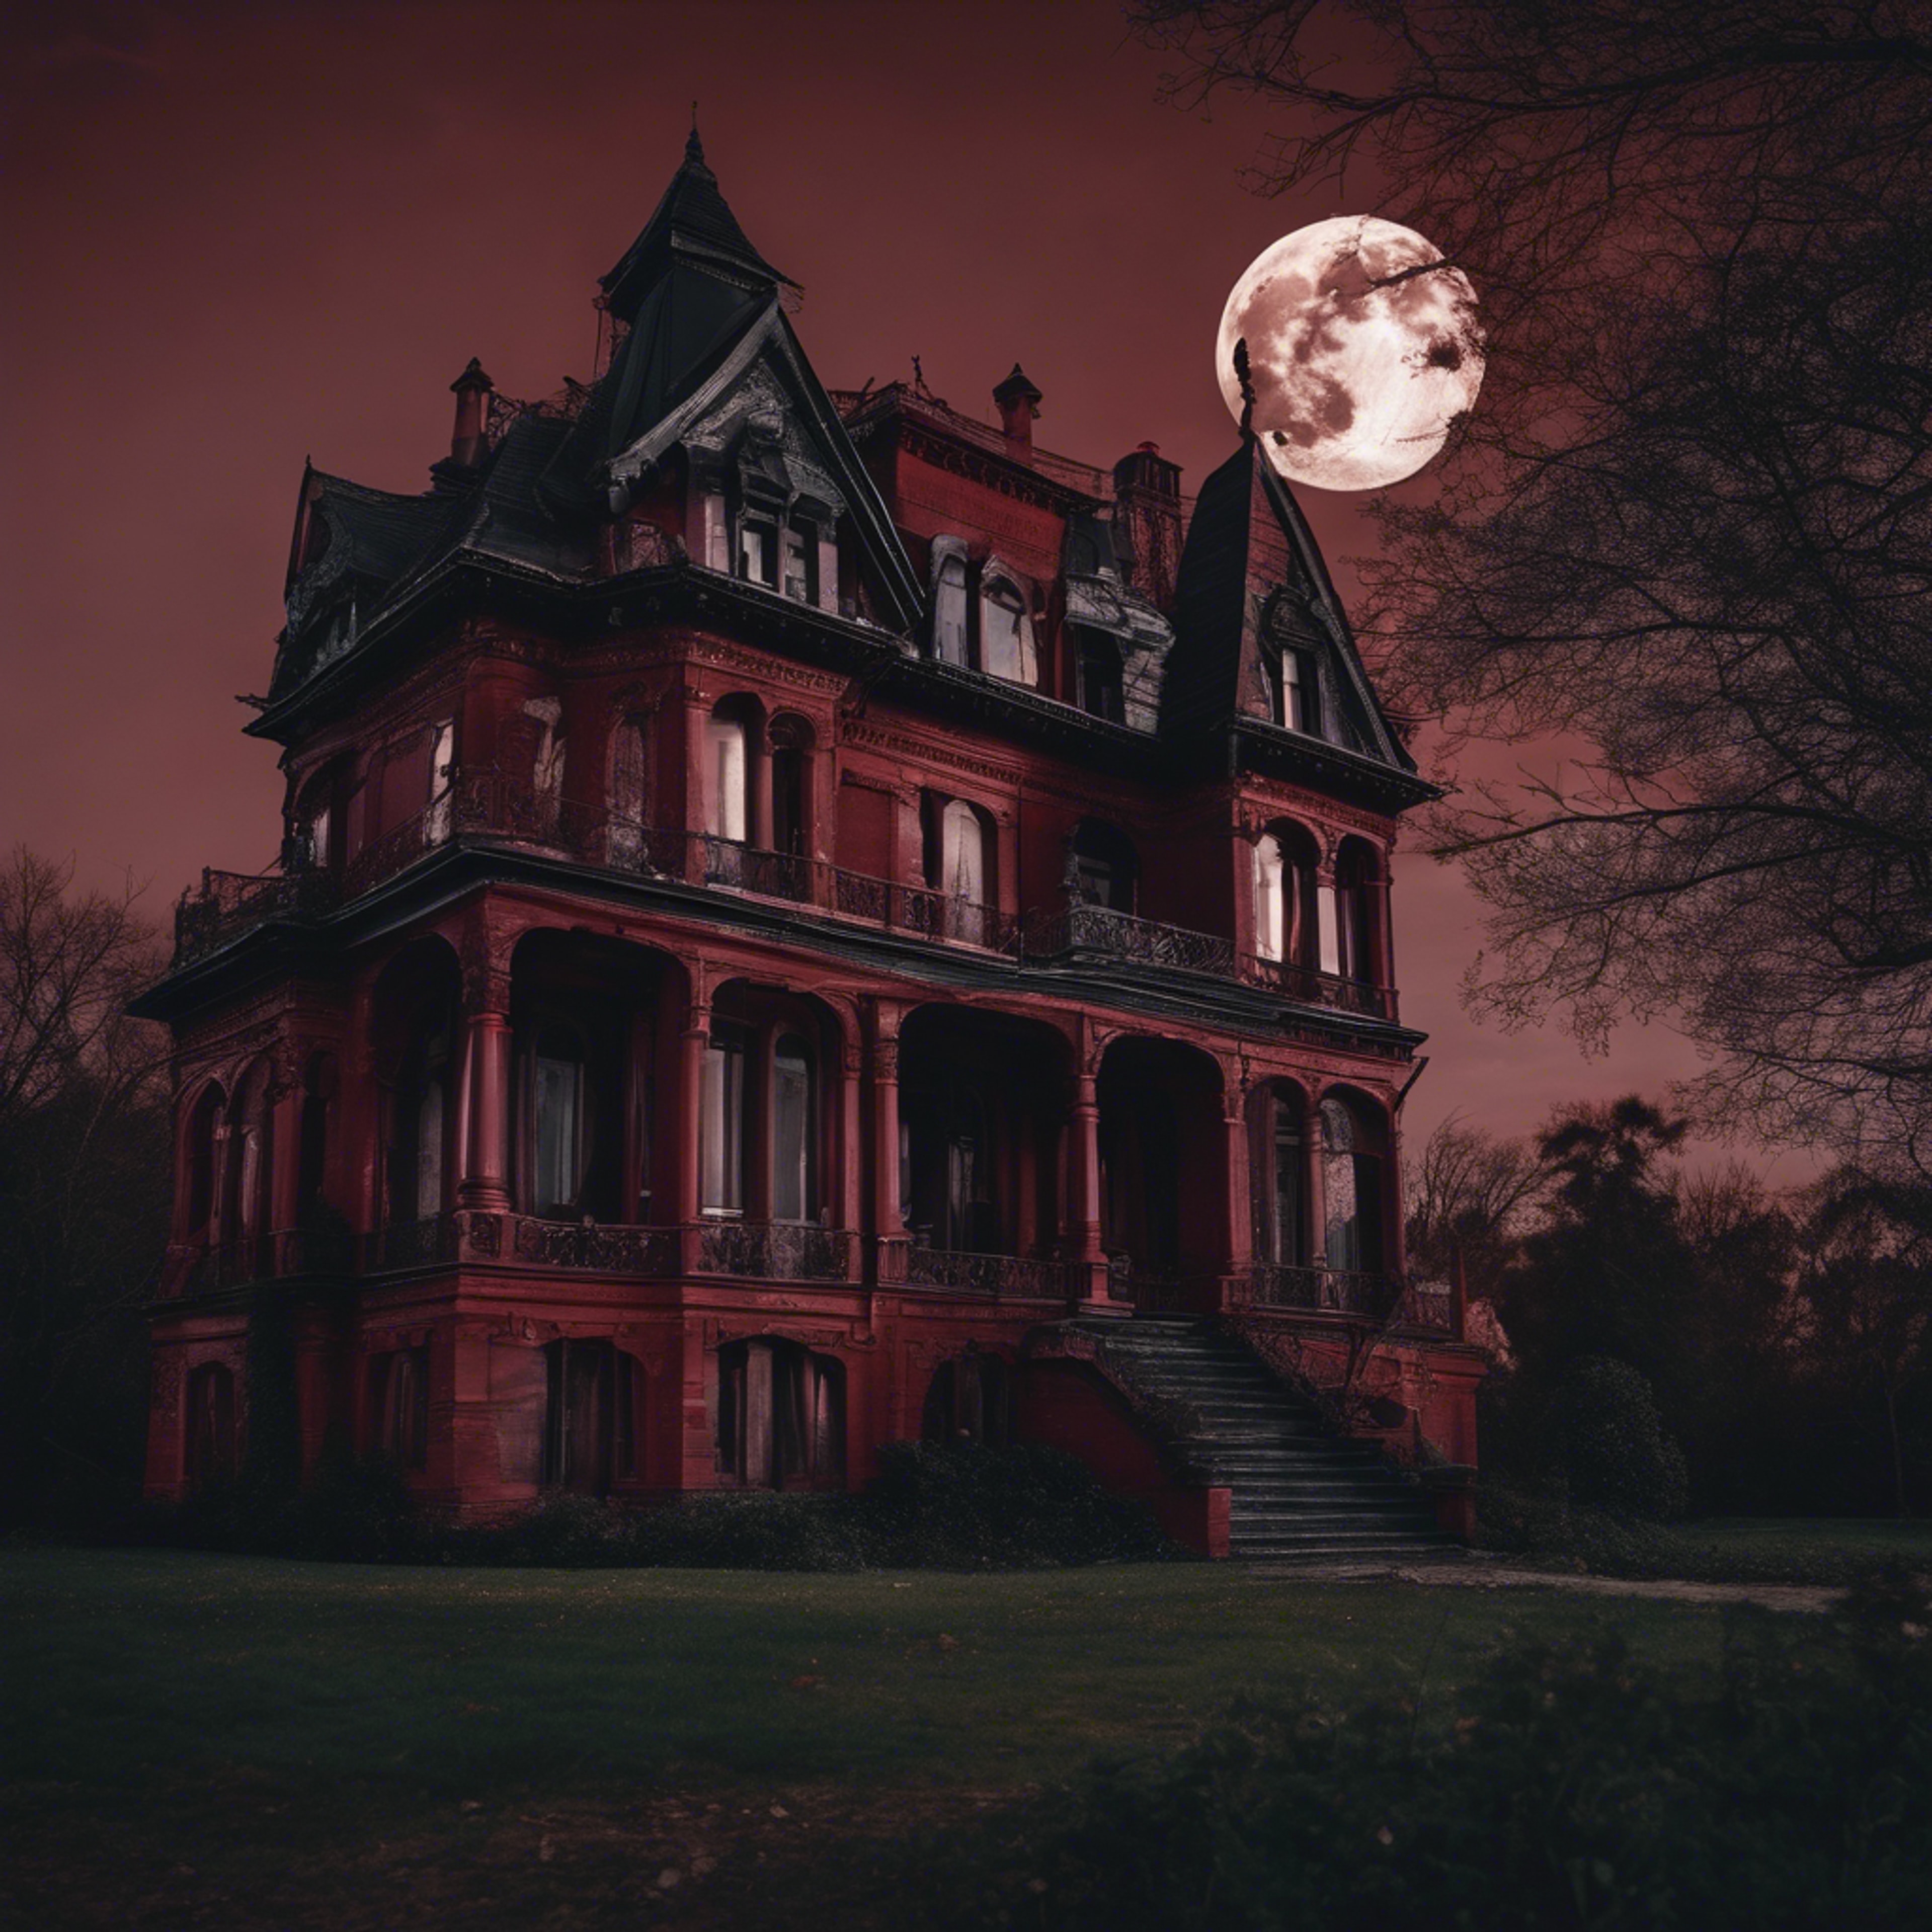 Moody view of an old Victorian mansion in dark red hues under a nearly full moon. Behang[8b4d1d2d66a3409f8c39]